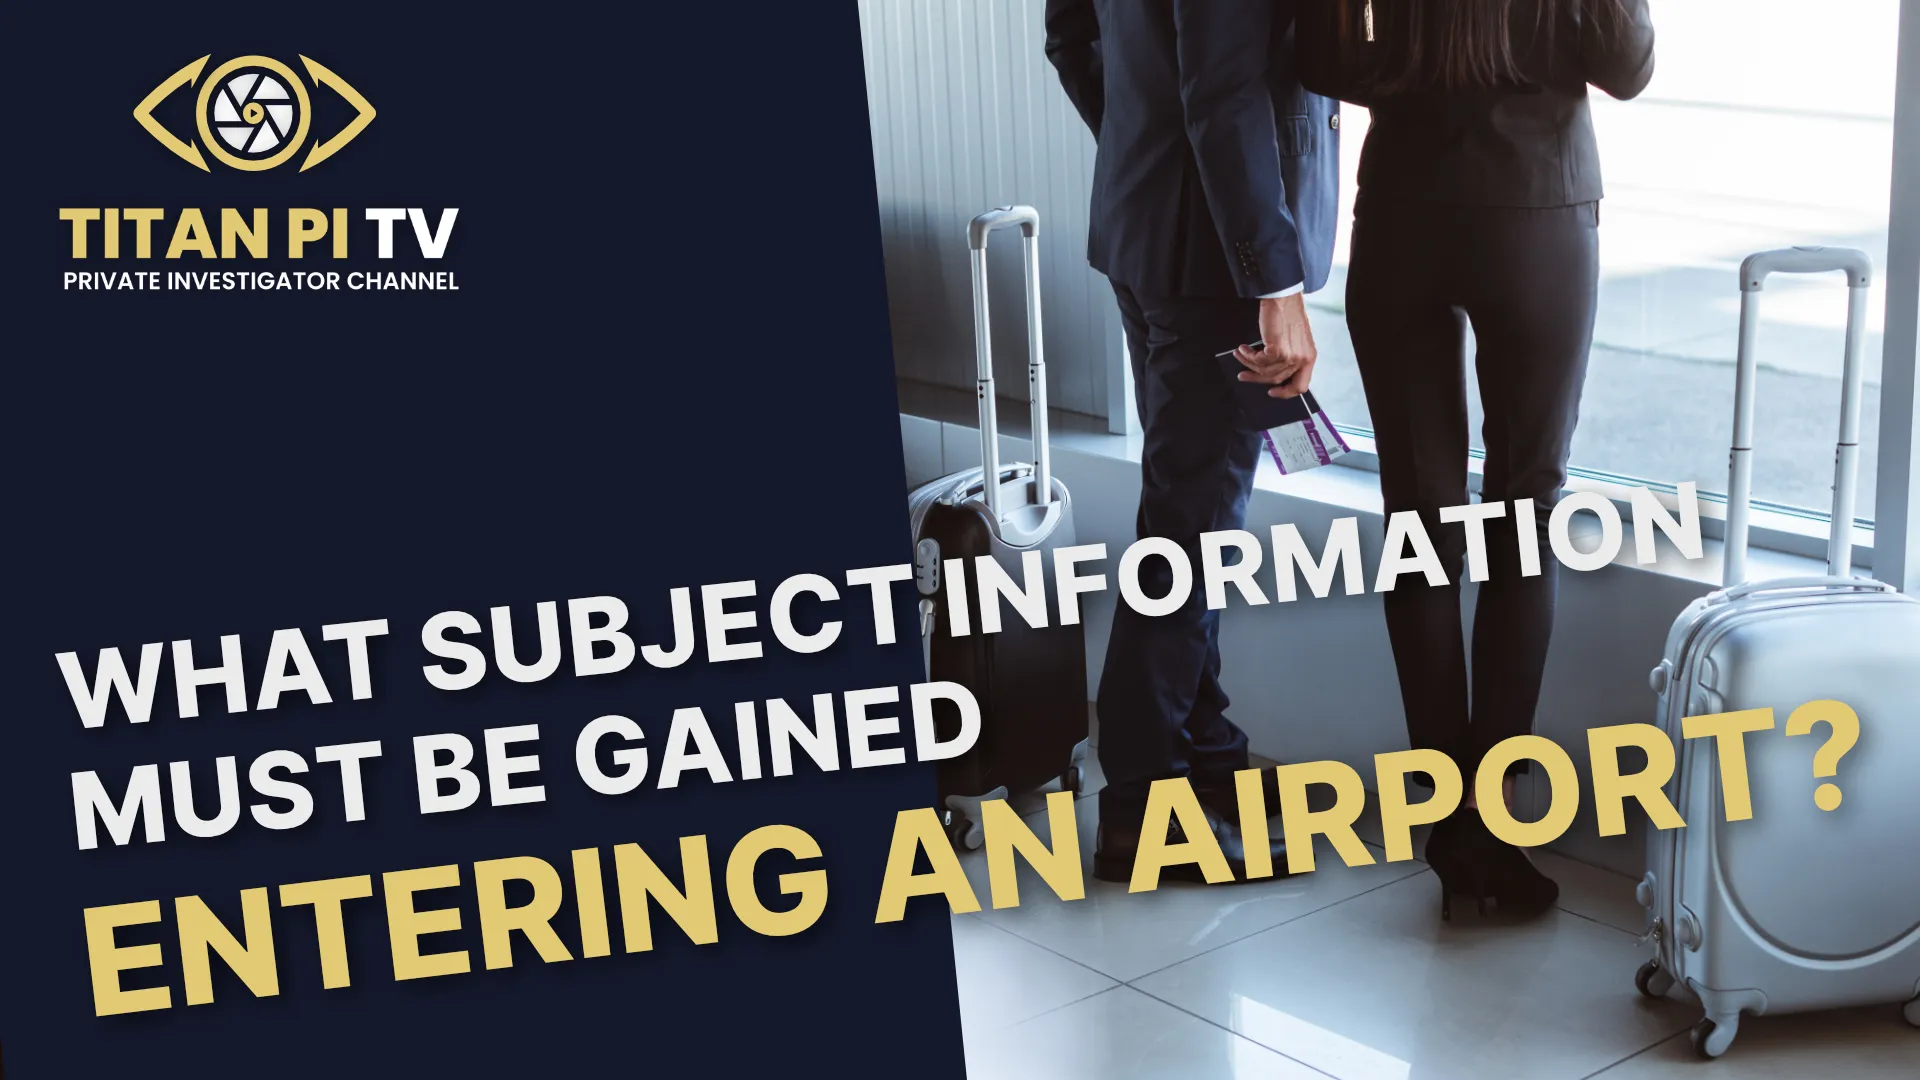 What subject information must be gained when entering an airport? E36 | Titan PI TV